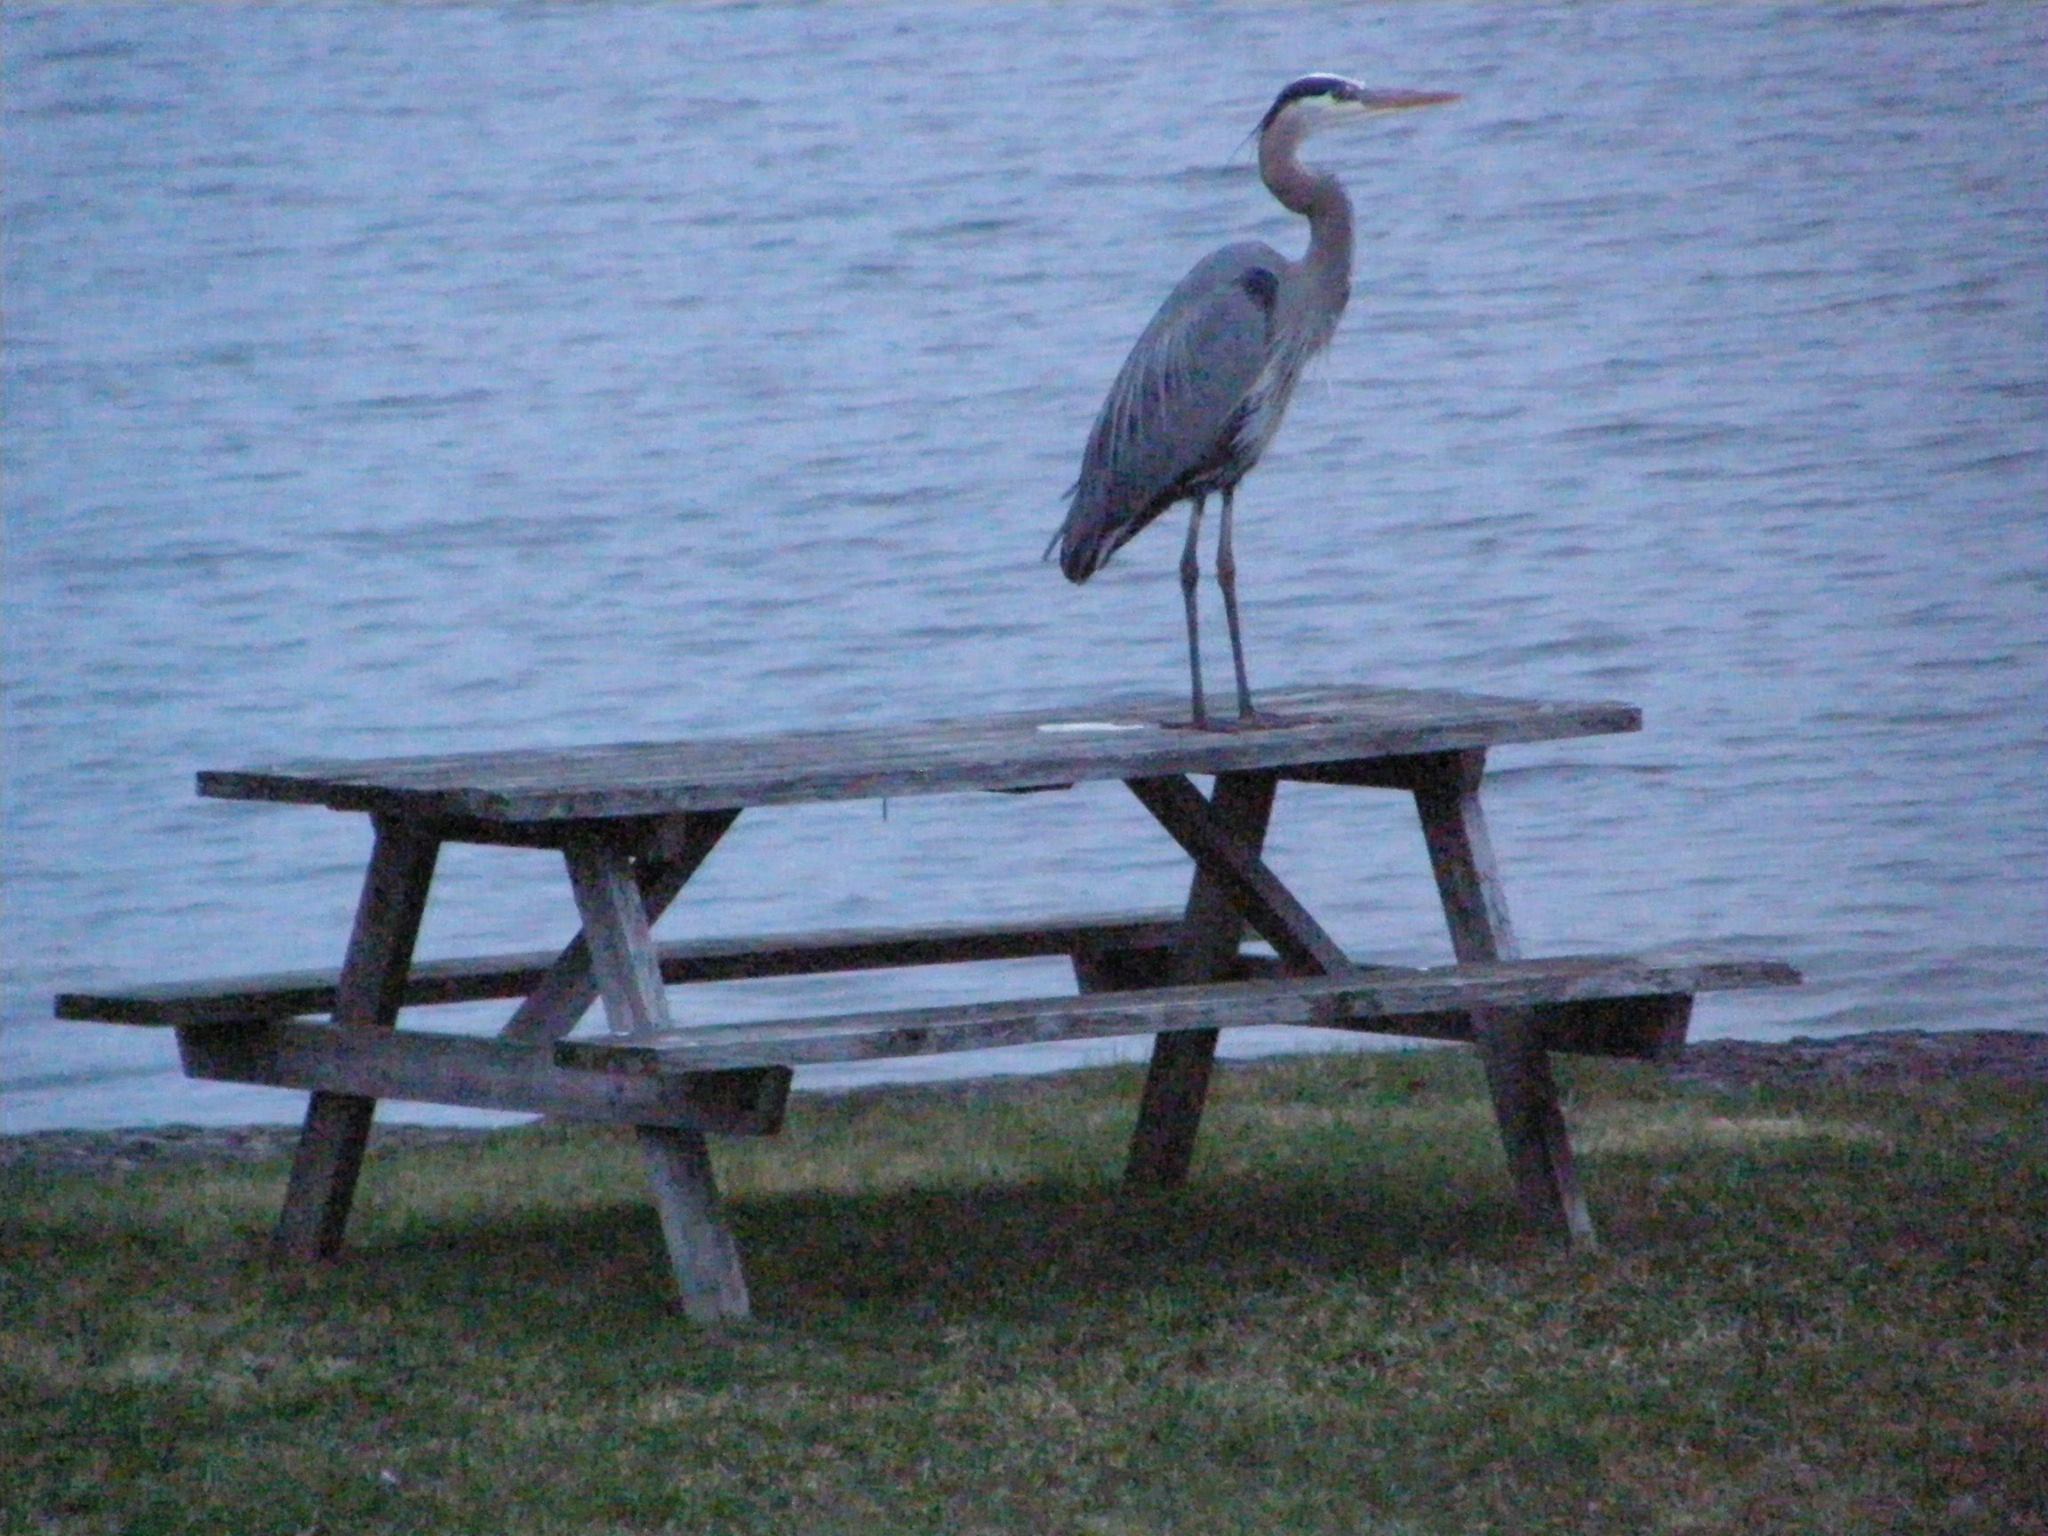 Egret Standing on a Bench